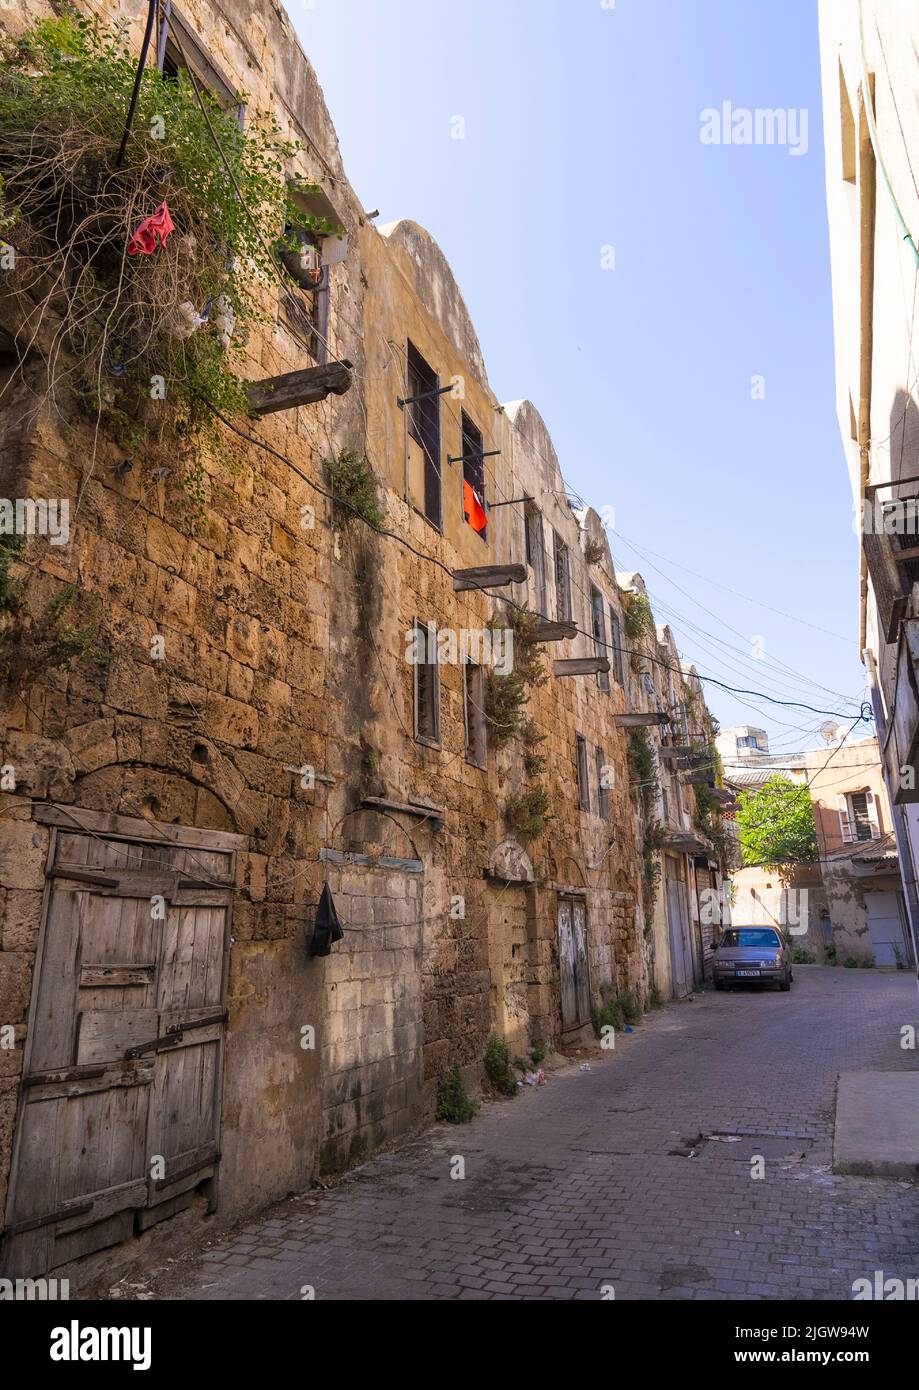 Old caravanserai occupied by poor people, North Governorate, Tripoli, Lebanon Stock Photo